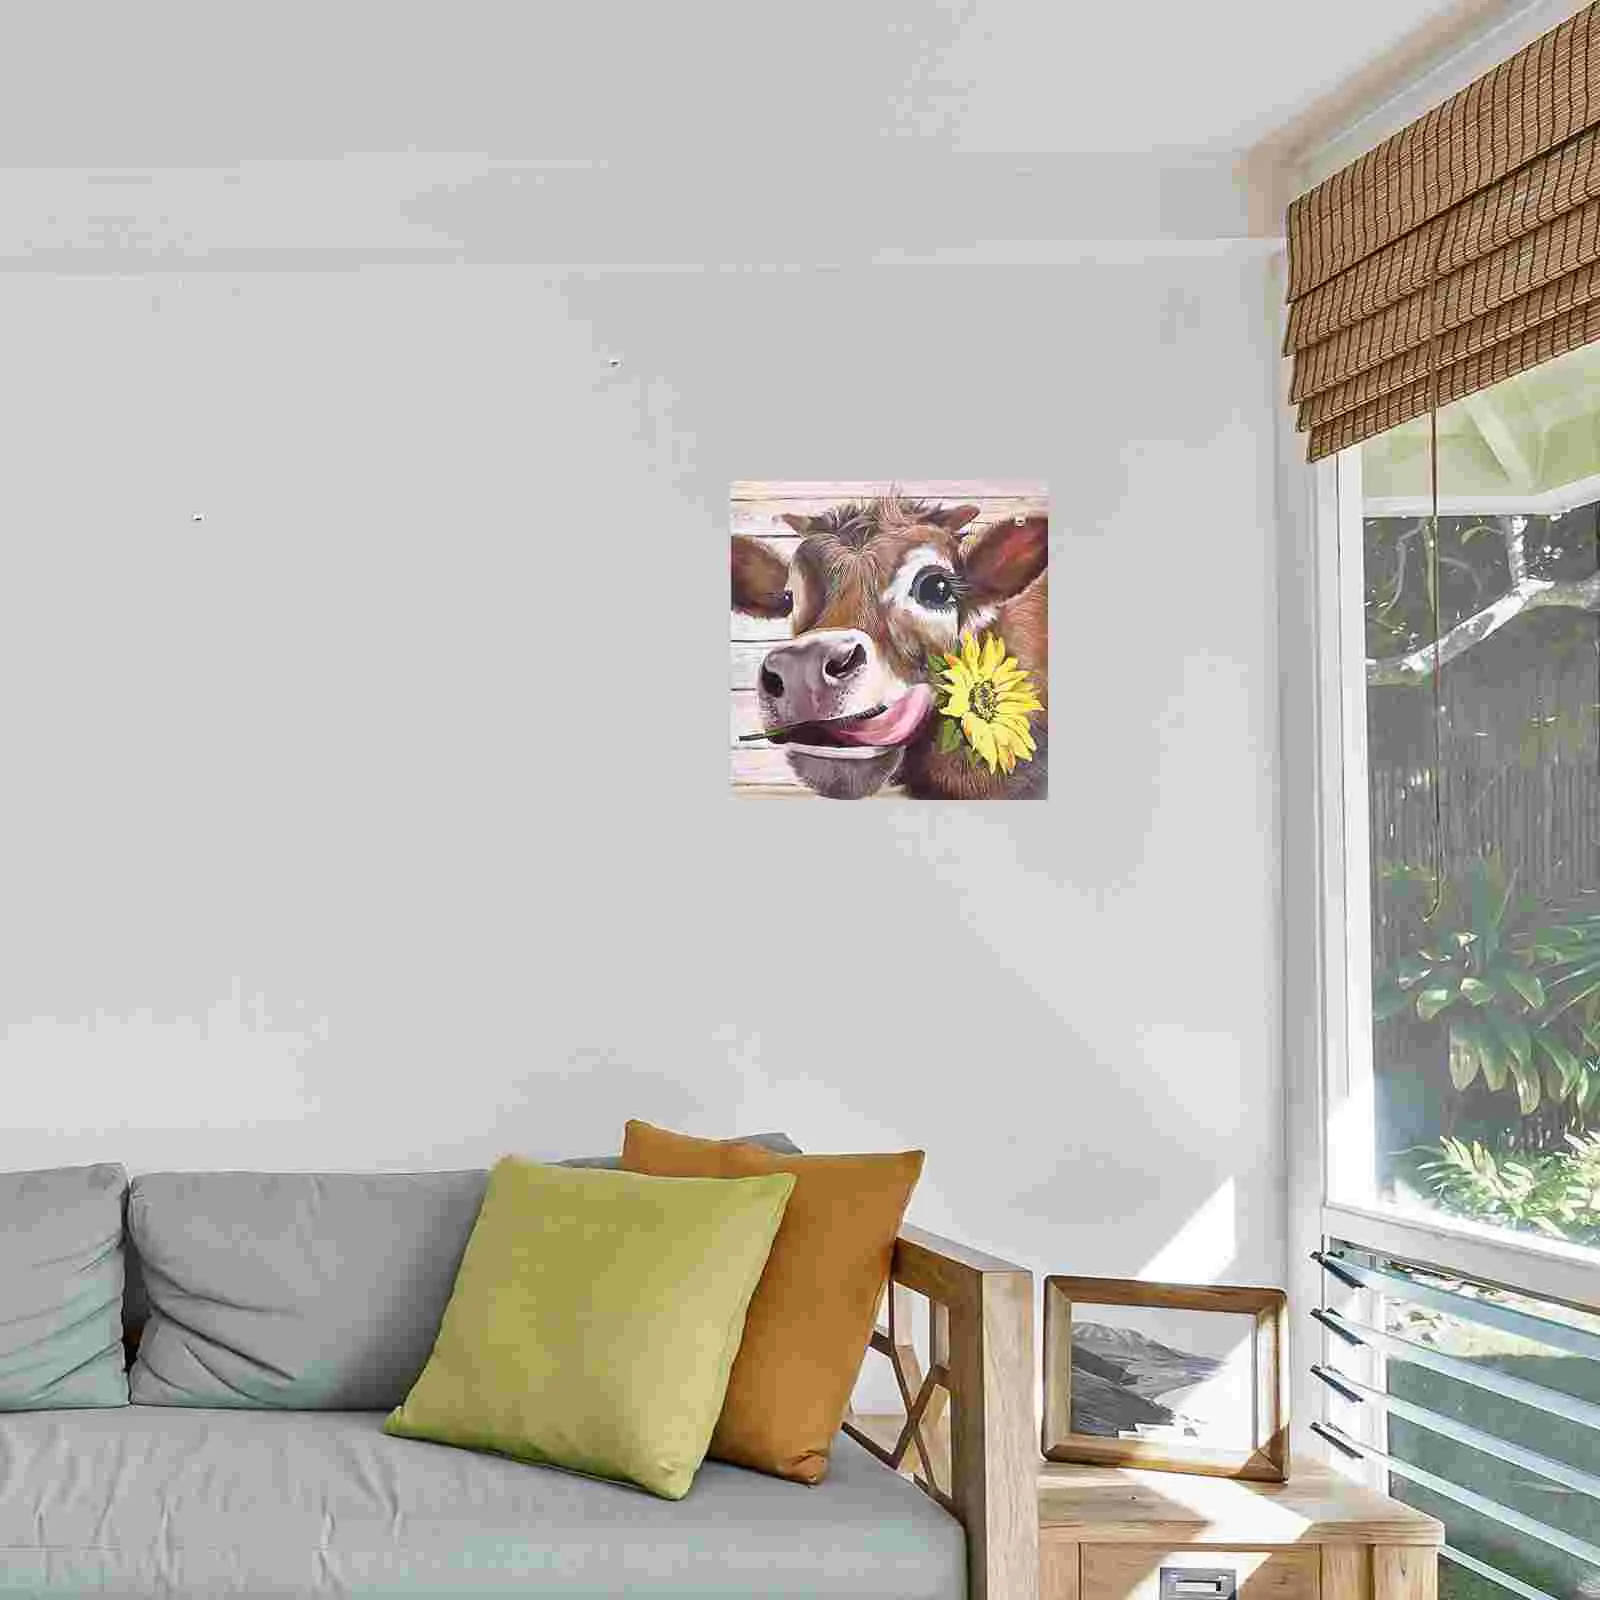 

Wall Cow Painting Farmhouse Canvas Picture Decor Pictures Decoration Paintings Frameless Country Rustic Prints Farm Print